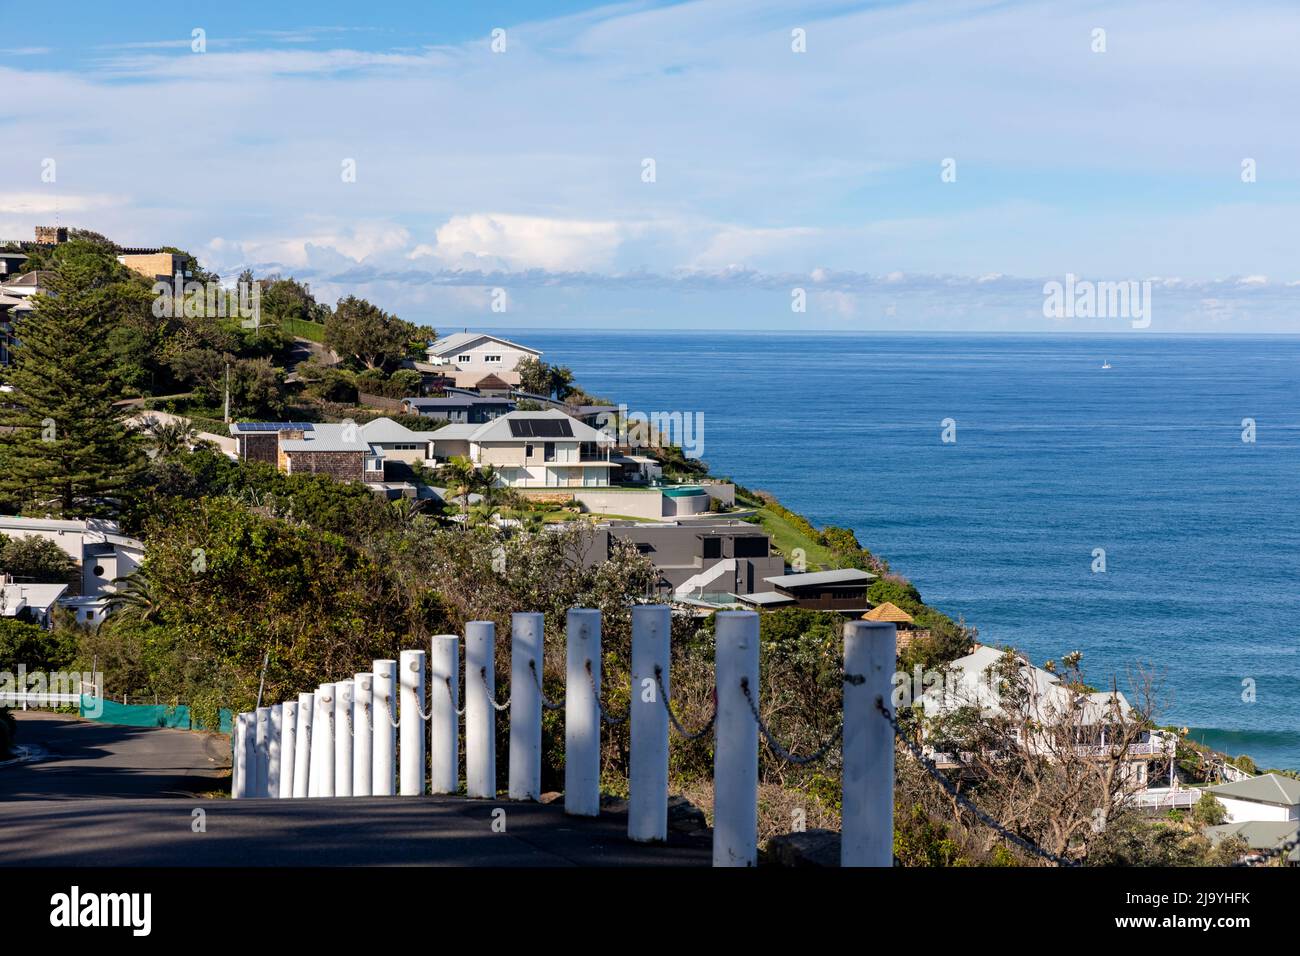 Sydney, expensive waterfront homes with ocean views at Bungan Beach in Sydney overlooking Bongin Bay and the ocean,Sydney,NSW,Australia Stock Photo